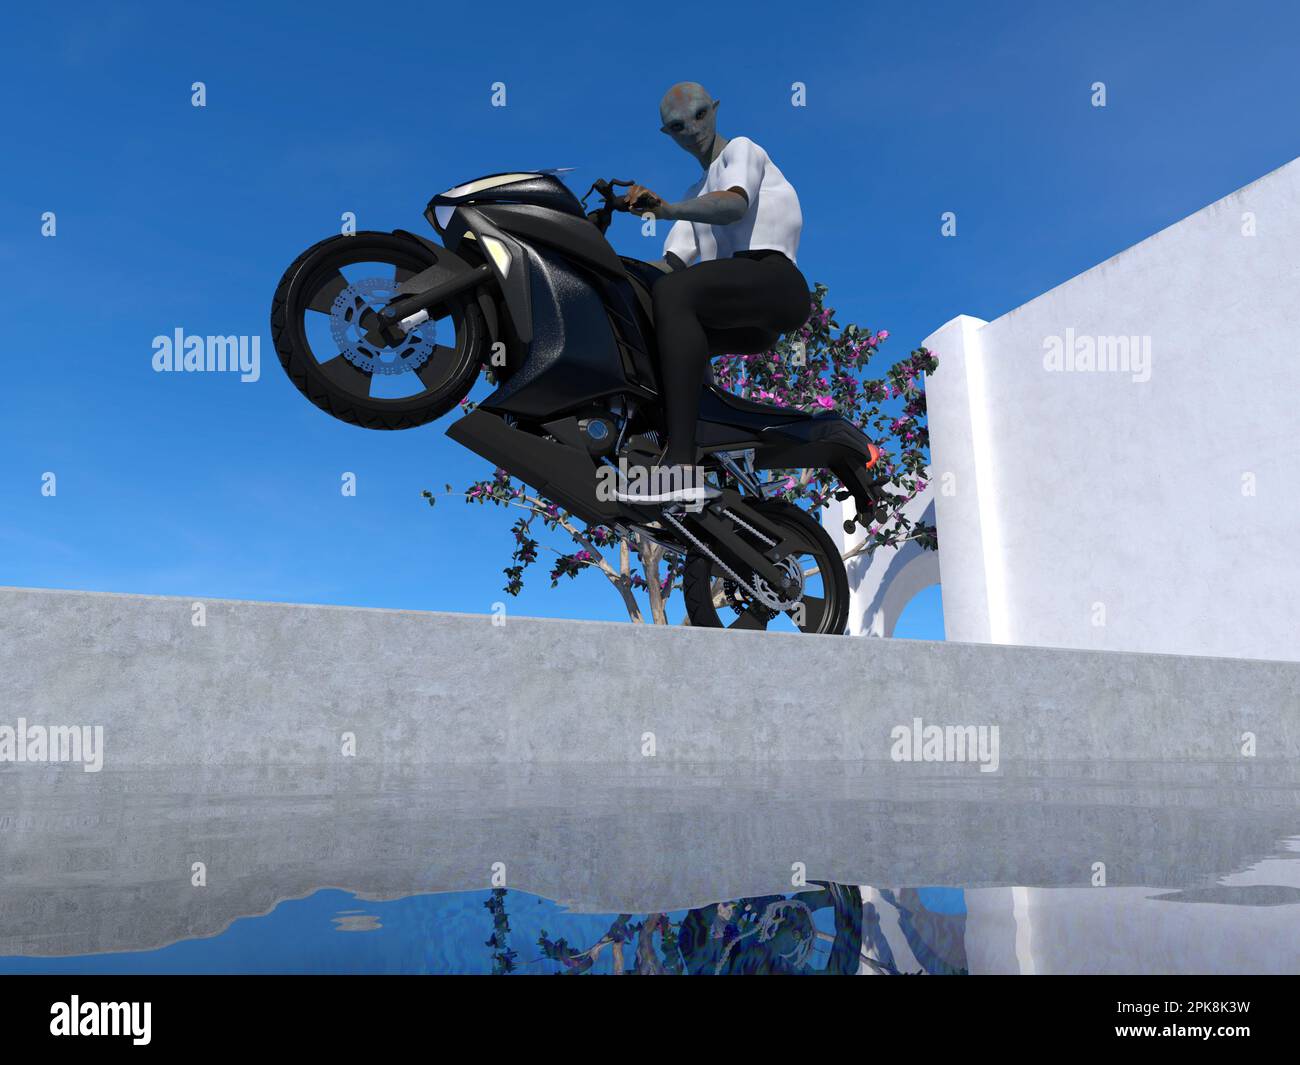 3d Illustration of an alien doing a wheelie on a motorcycle next to a pool with a blue sky in the background. Stock Photo